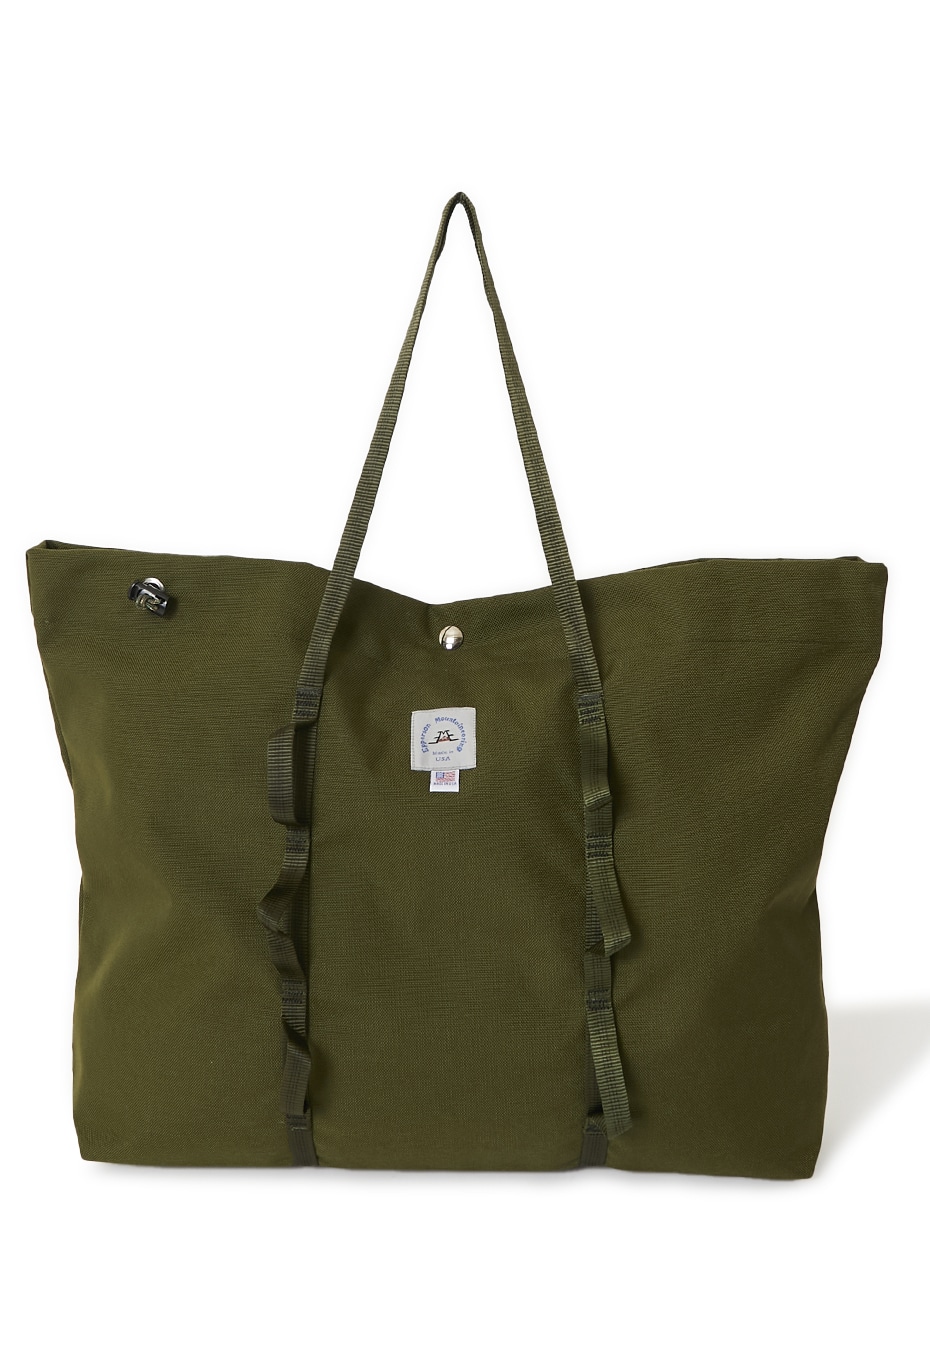 EPPERSON MOUNTAINEERING Large Crime Tote Bag